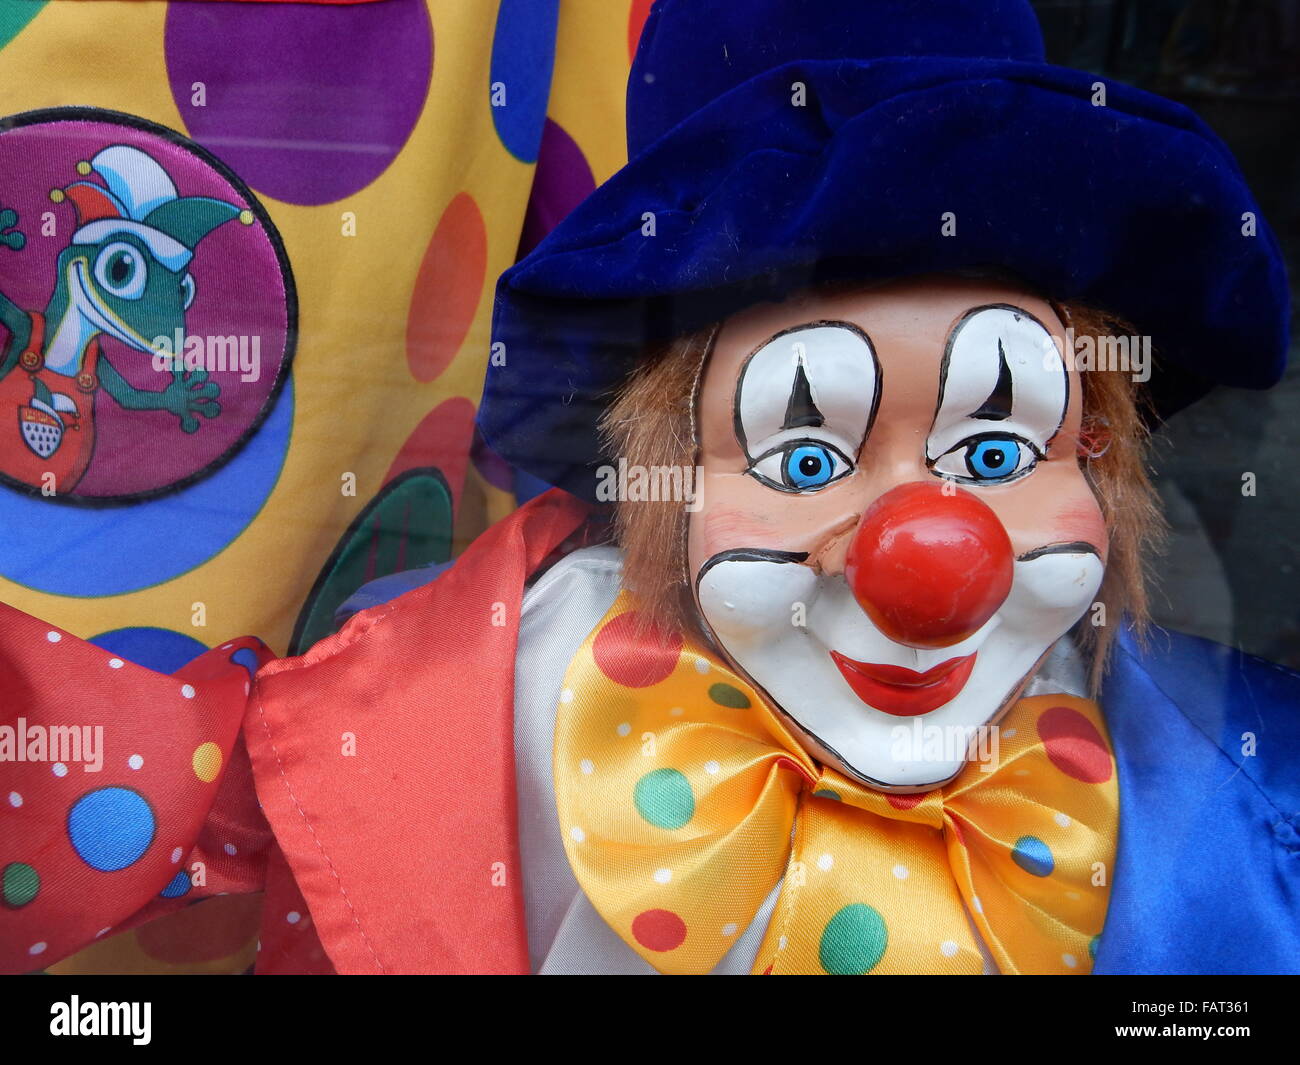 Doll in Carnival Costume and Mask Stock Image - Image of beauty, concept:  51680091